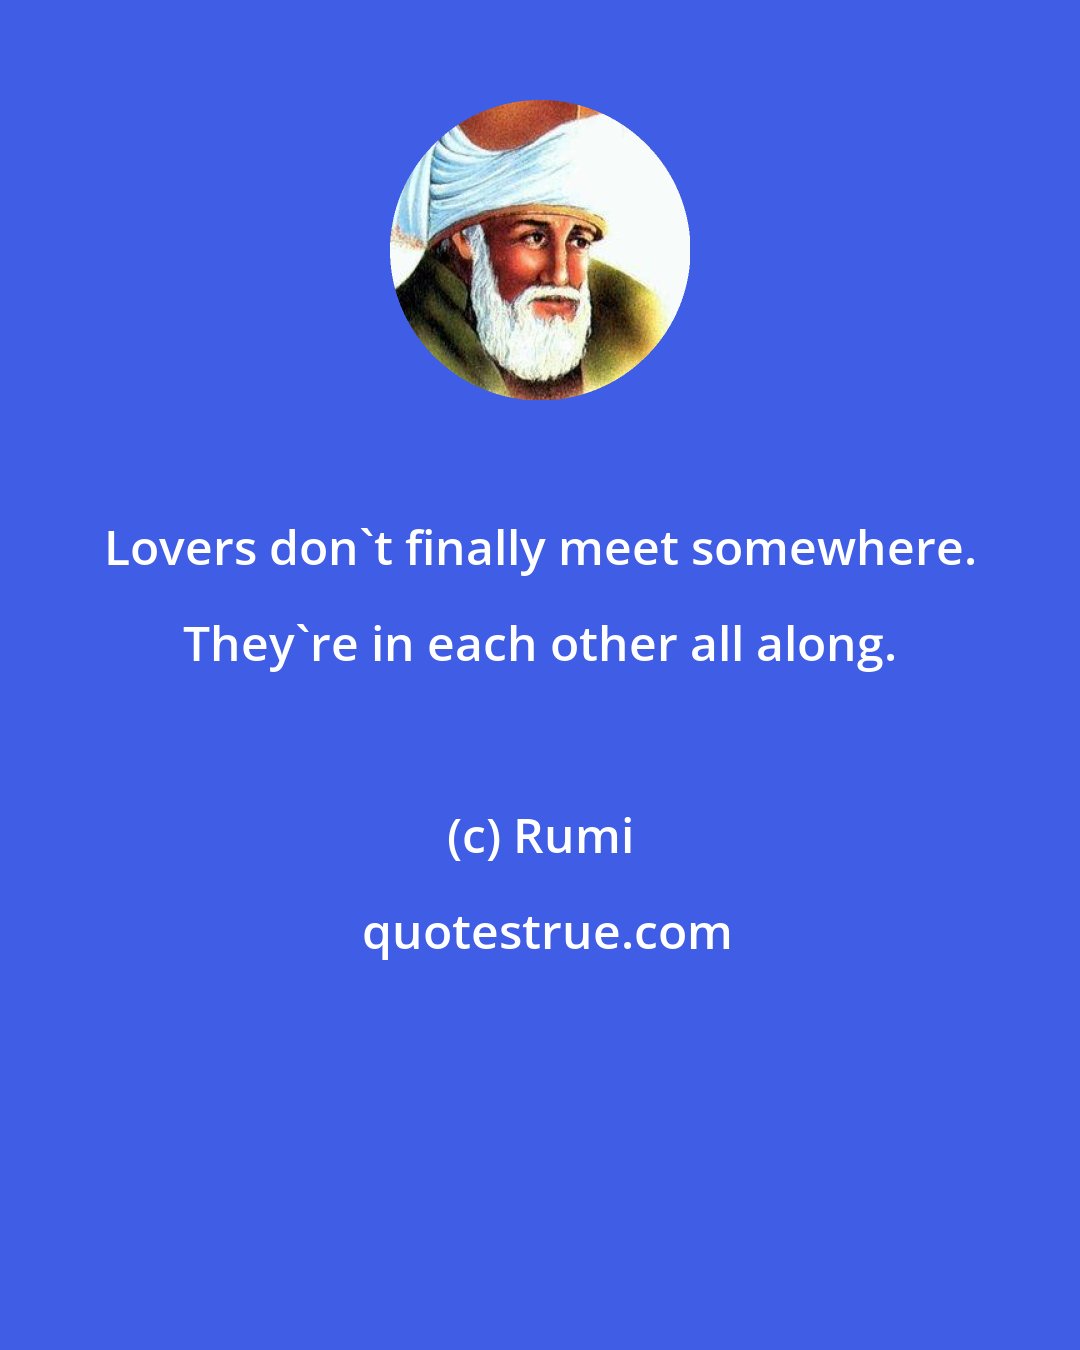 Rumi: Lovers don't finally meet somewhere. They're in each other all along.